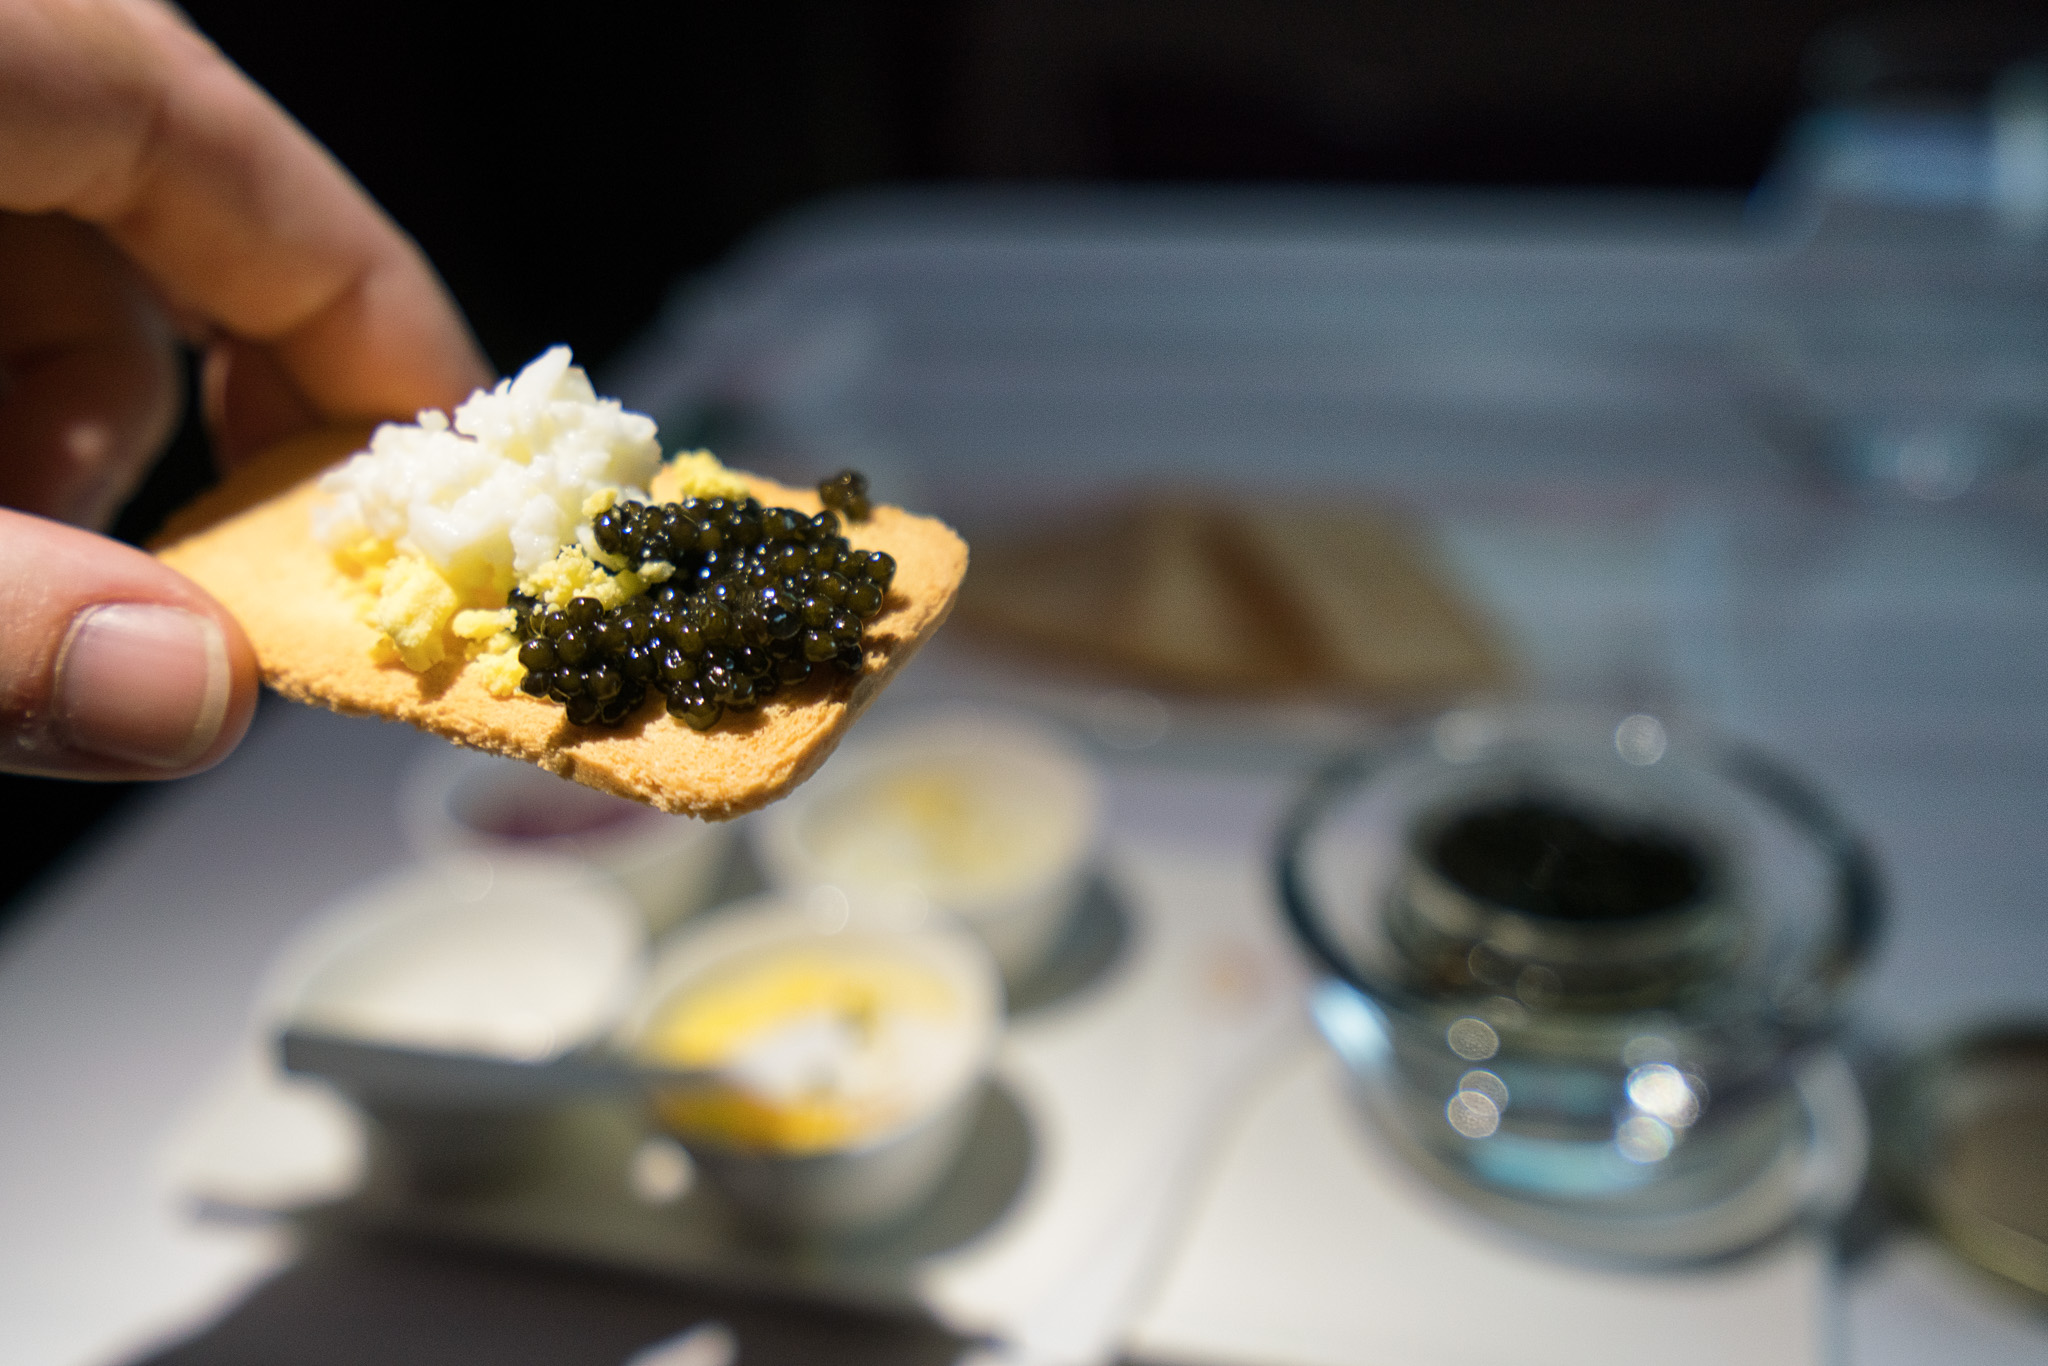 a hand holding a cracker with black and white caviar